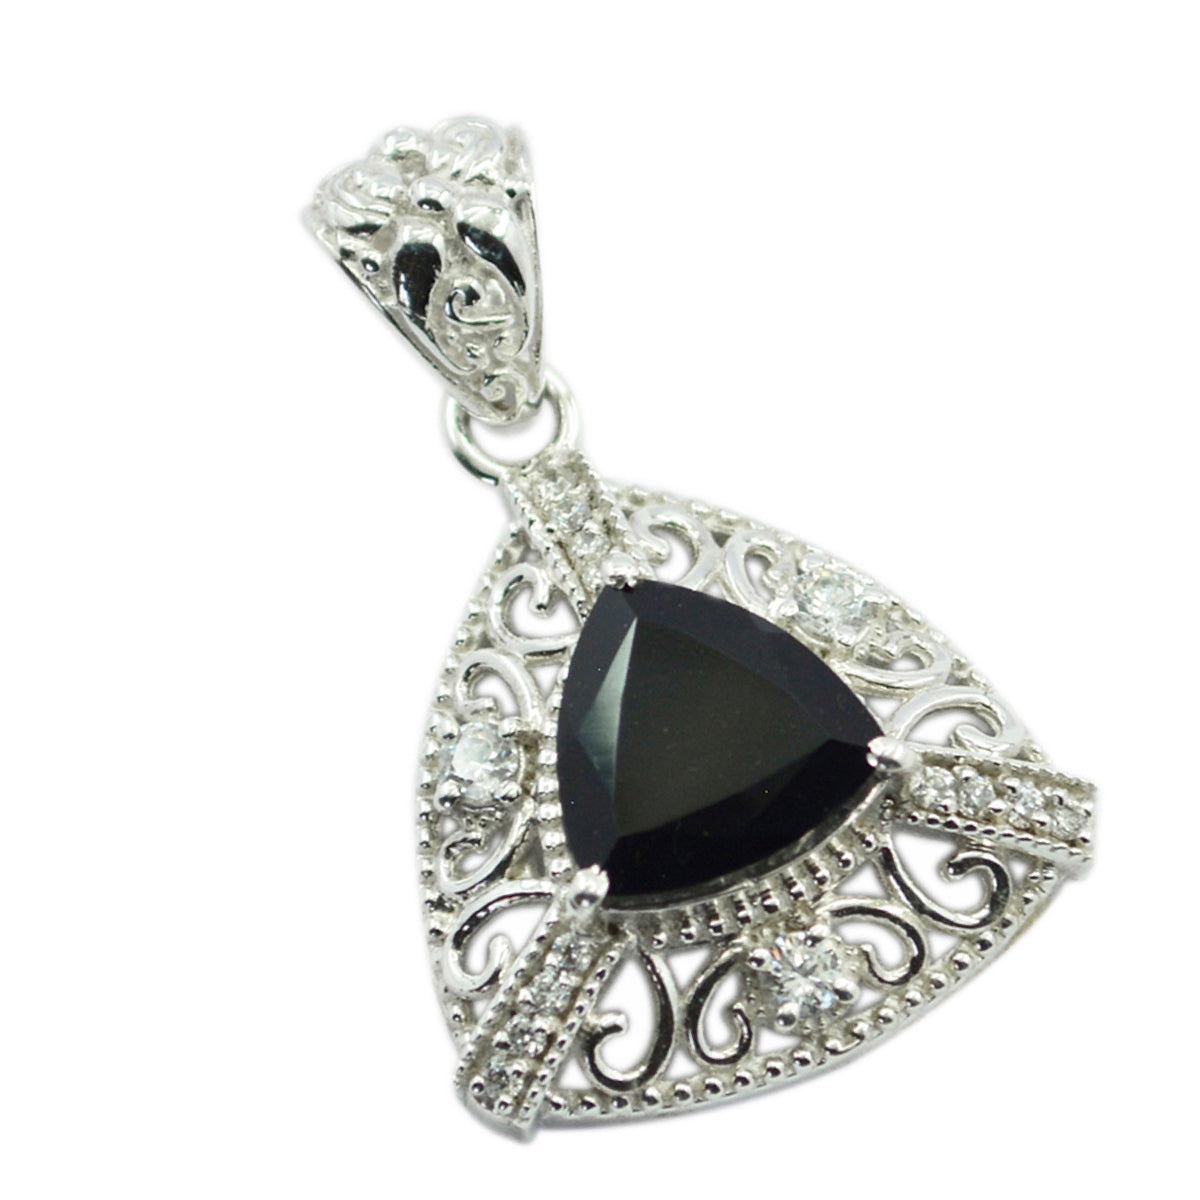 Riyo Pretty Gems Trillion Faceted Black Black Onyx Solid Silver Pendant Gift For Easter Sunday